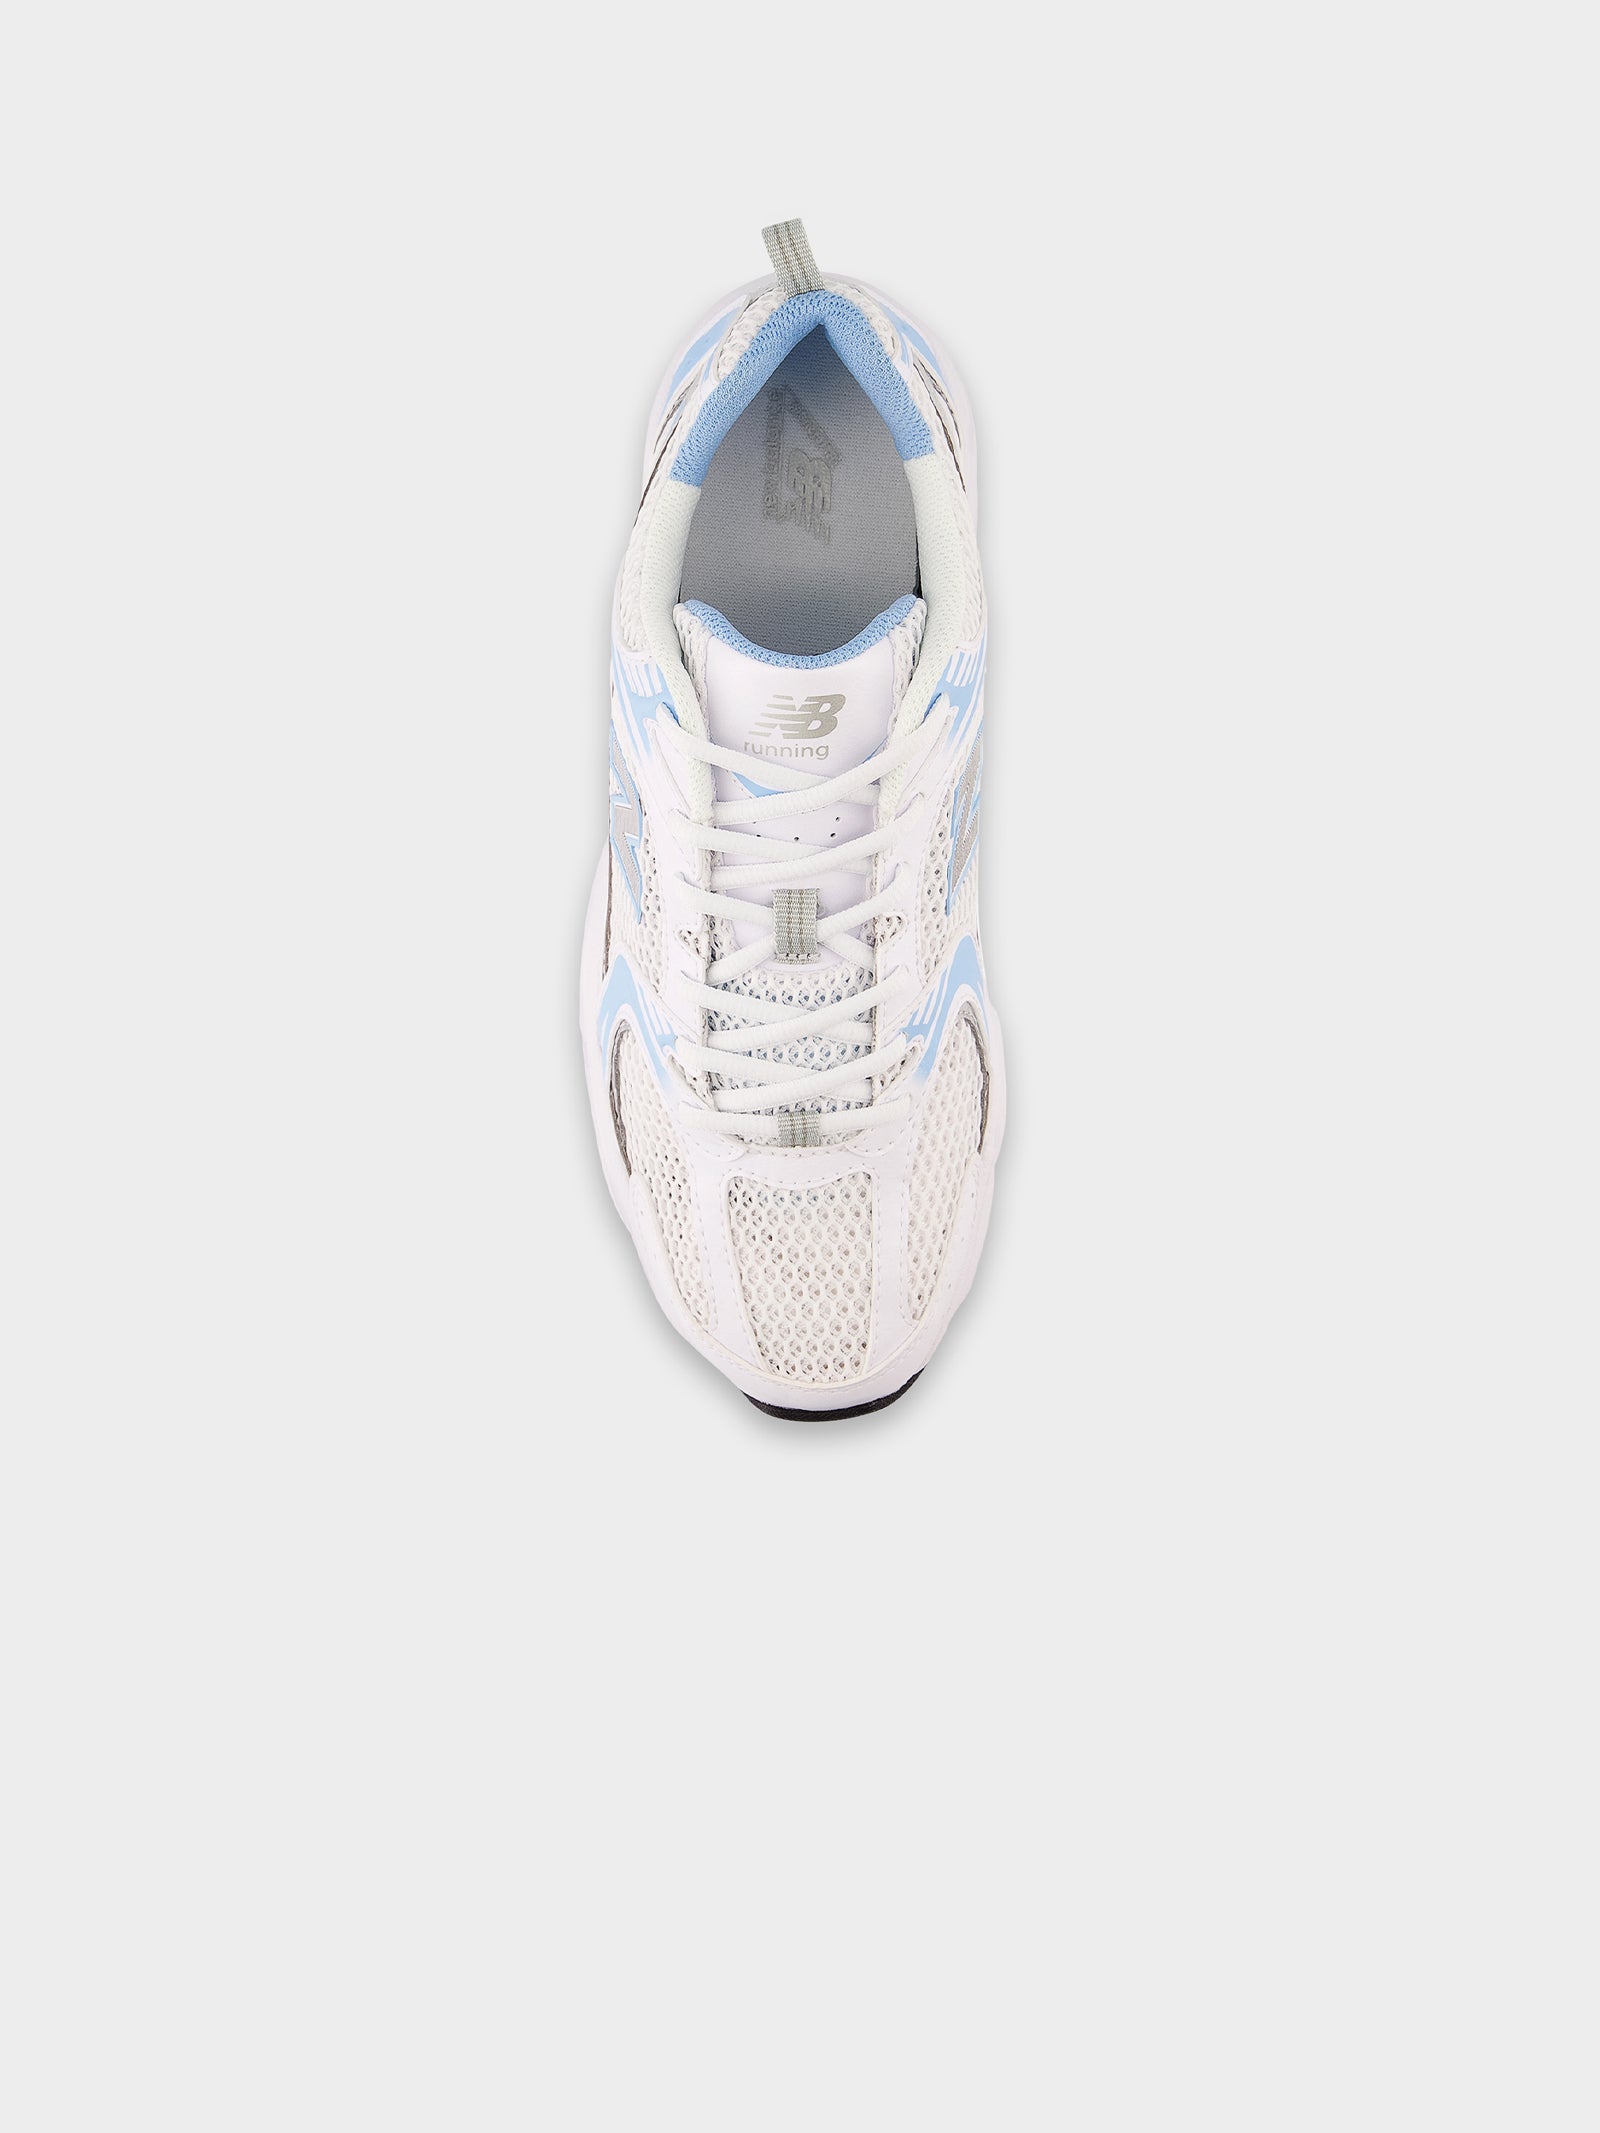 Unisex 530 Sneakers in White & Blue